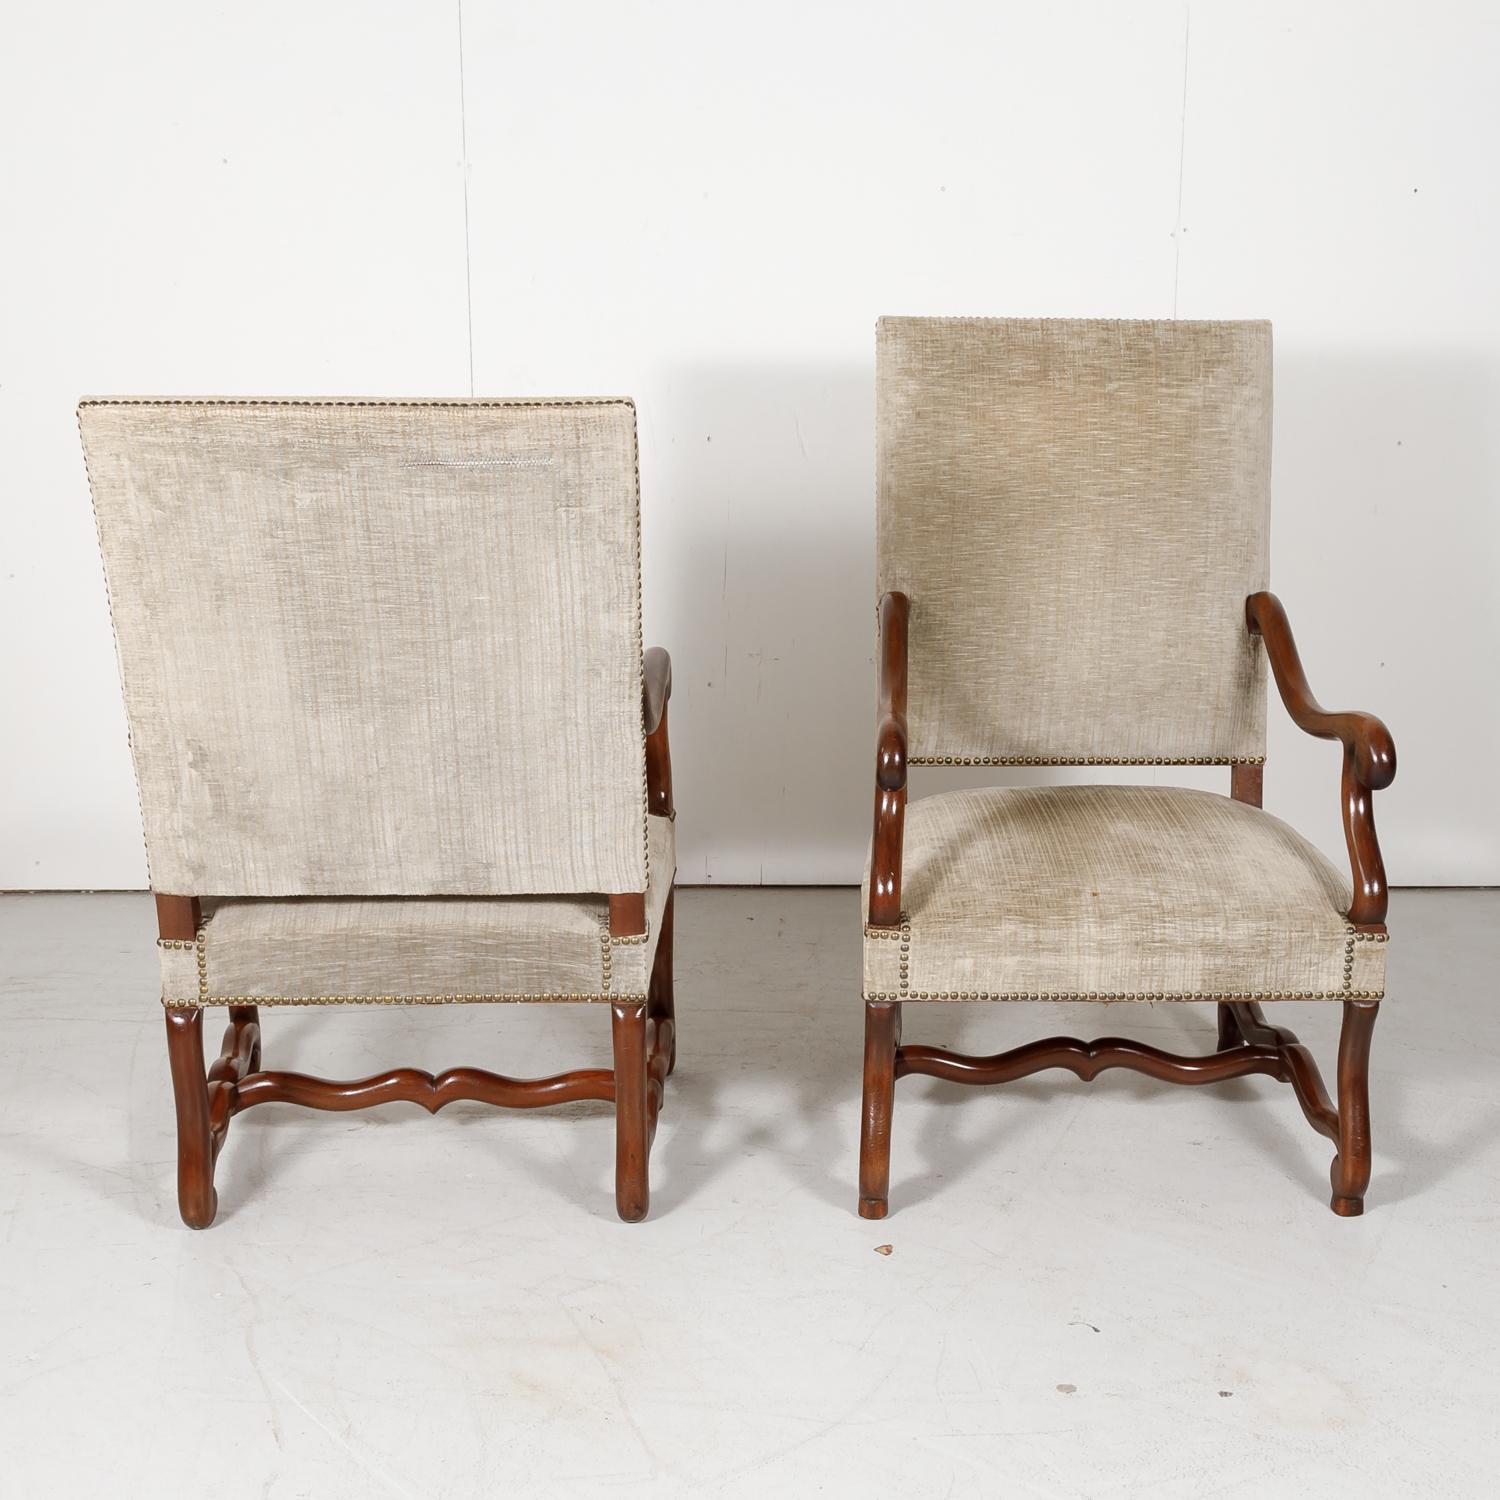 Late 19th Century Pair of French Louis XIII Style Os de Mouton Armchairs